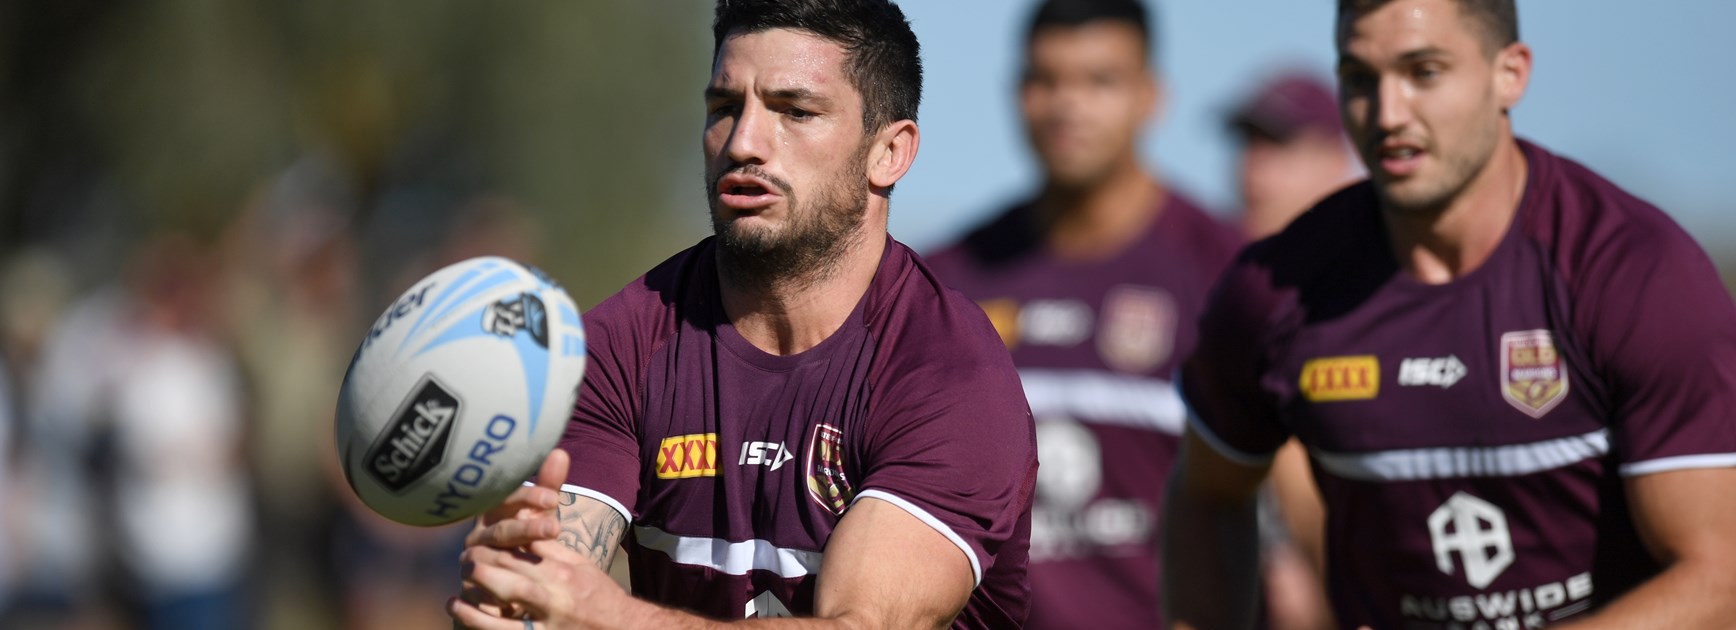 Brisbane Broncos players to ride into Cairns in August